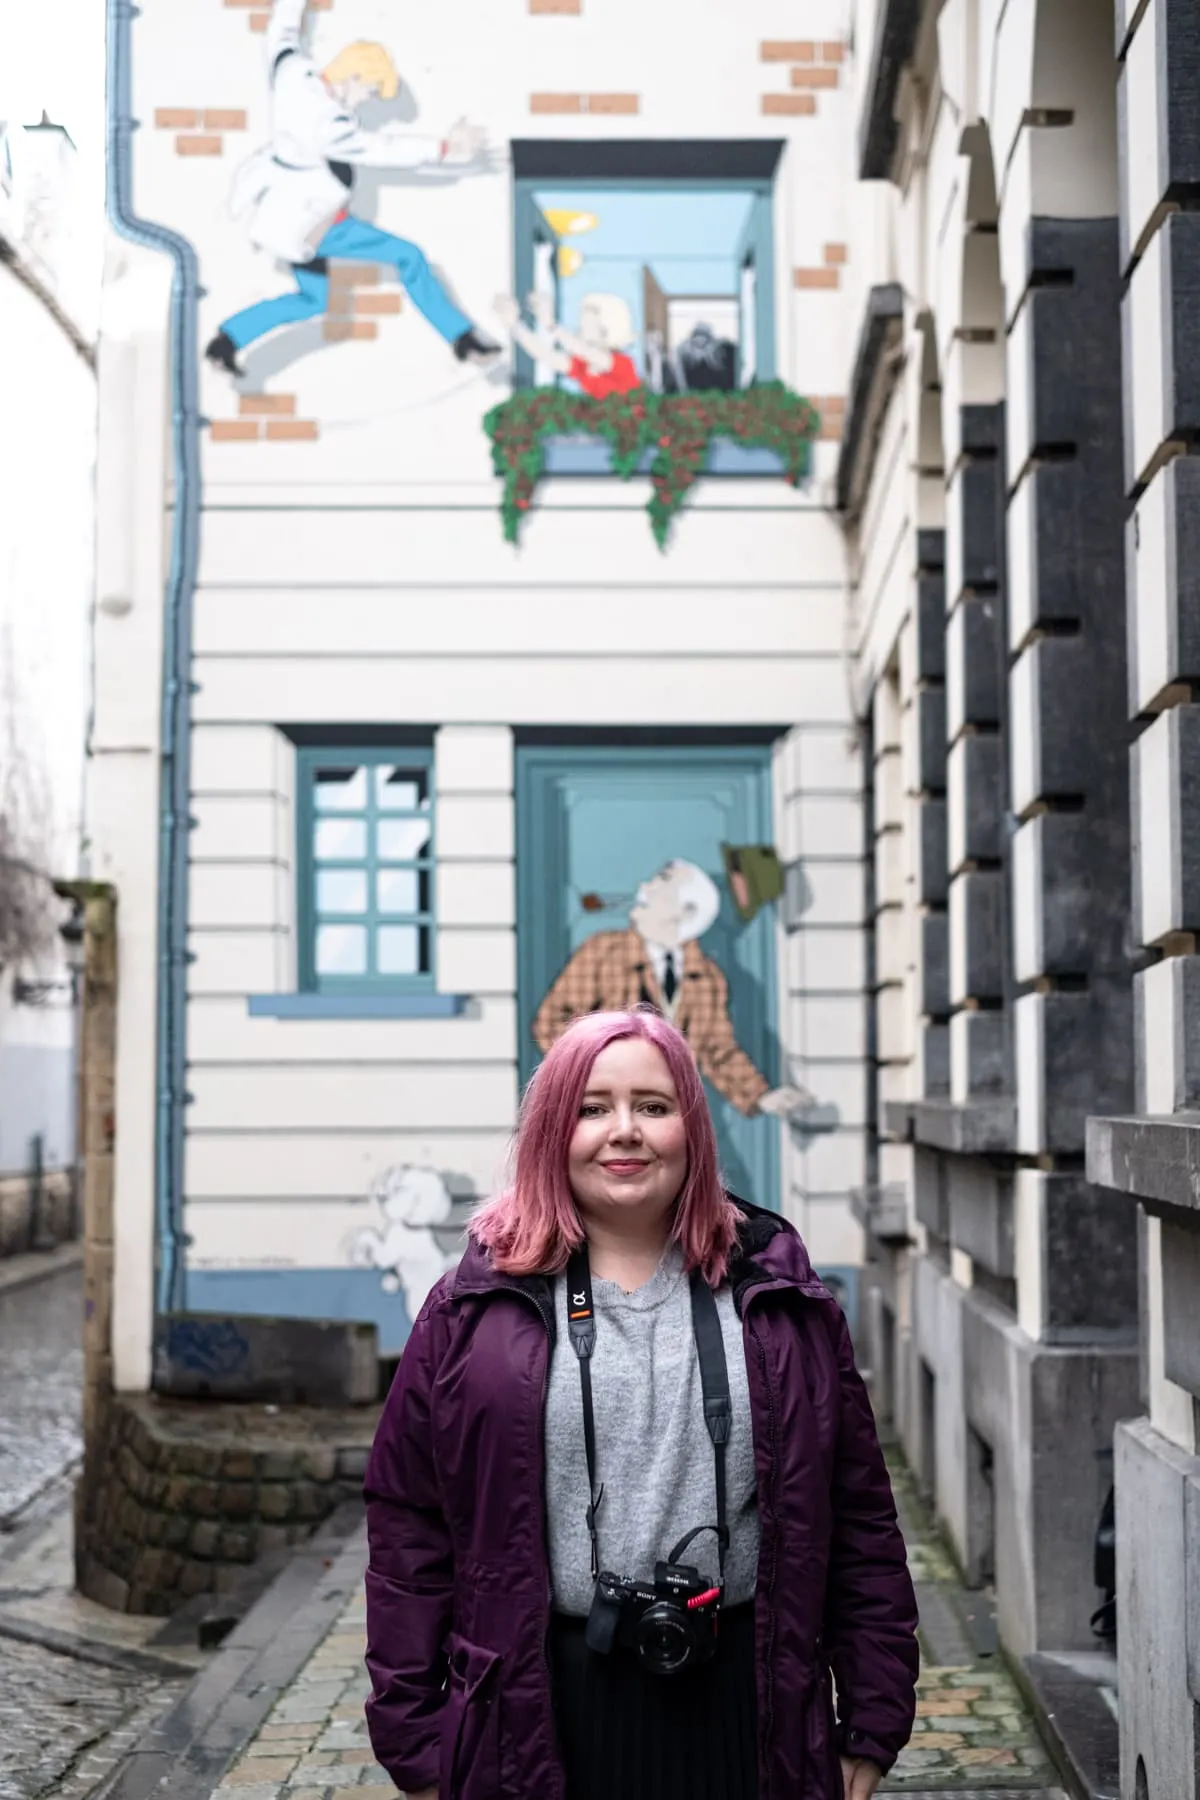 Kat next to Comic Book Strip in Brussels